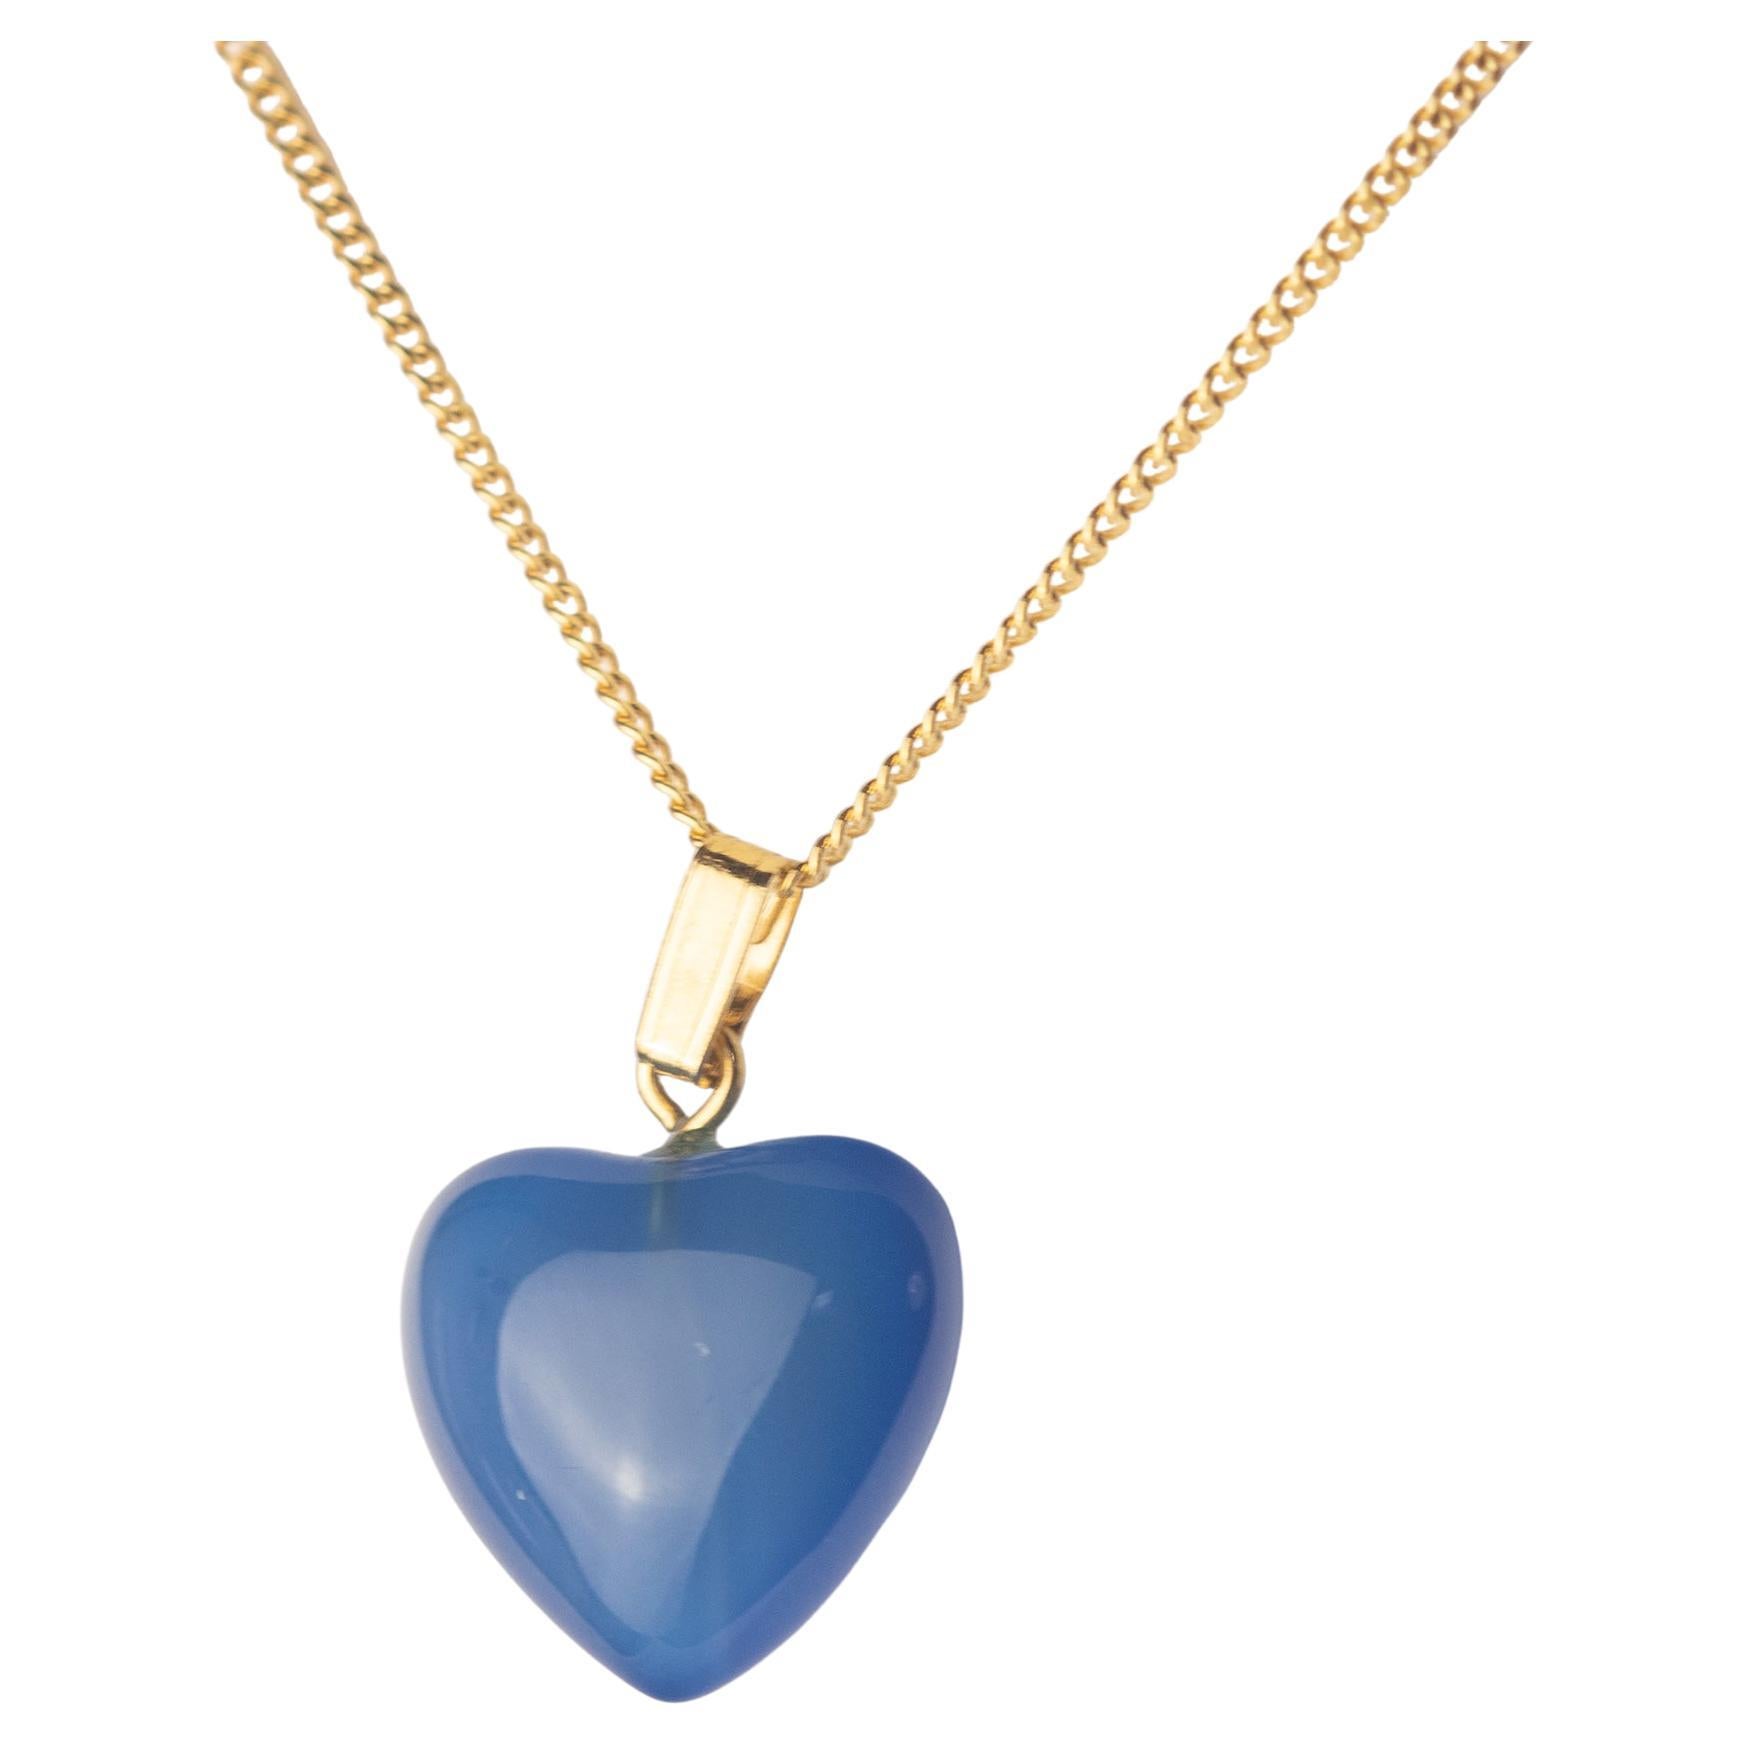 Take love with you everywhere! This breathtaking necklace has a sweet design with the most precious gemstone hanging from a delicate 9 karat gold chain. The Natural Blue Quartzactivates spiritual awareness, opens intuition and enhances your senses